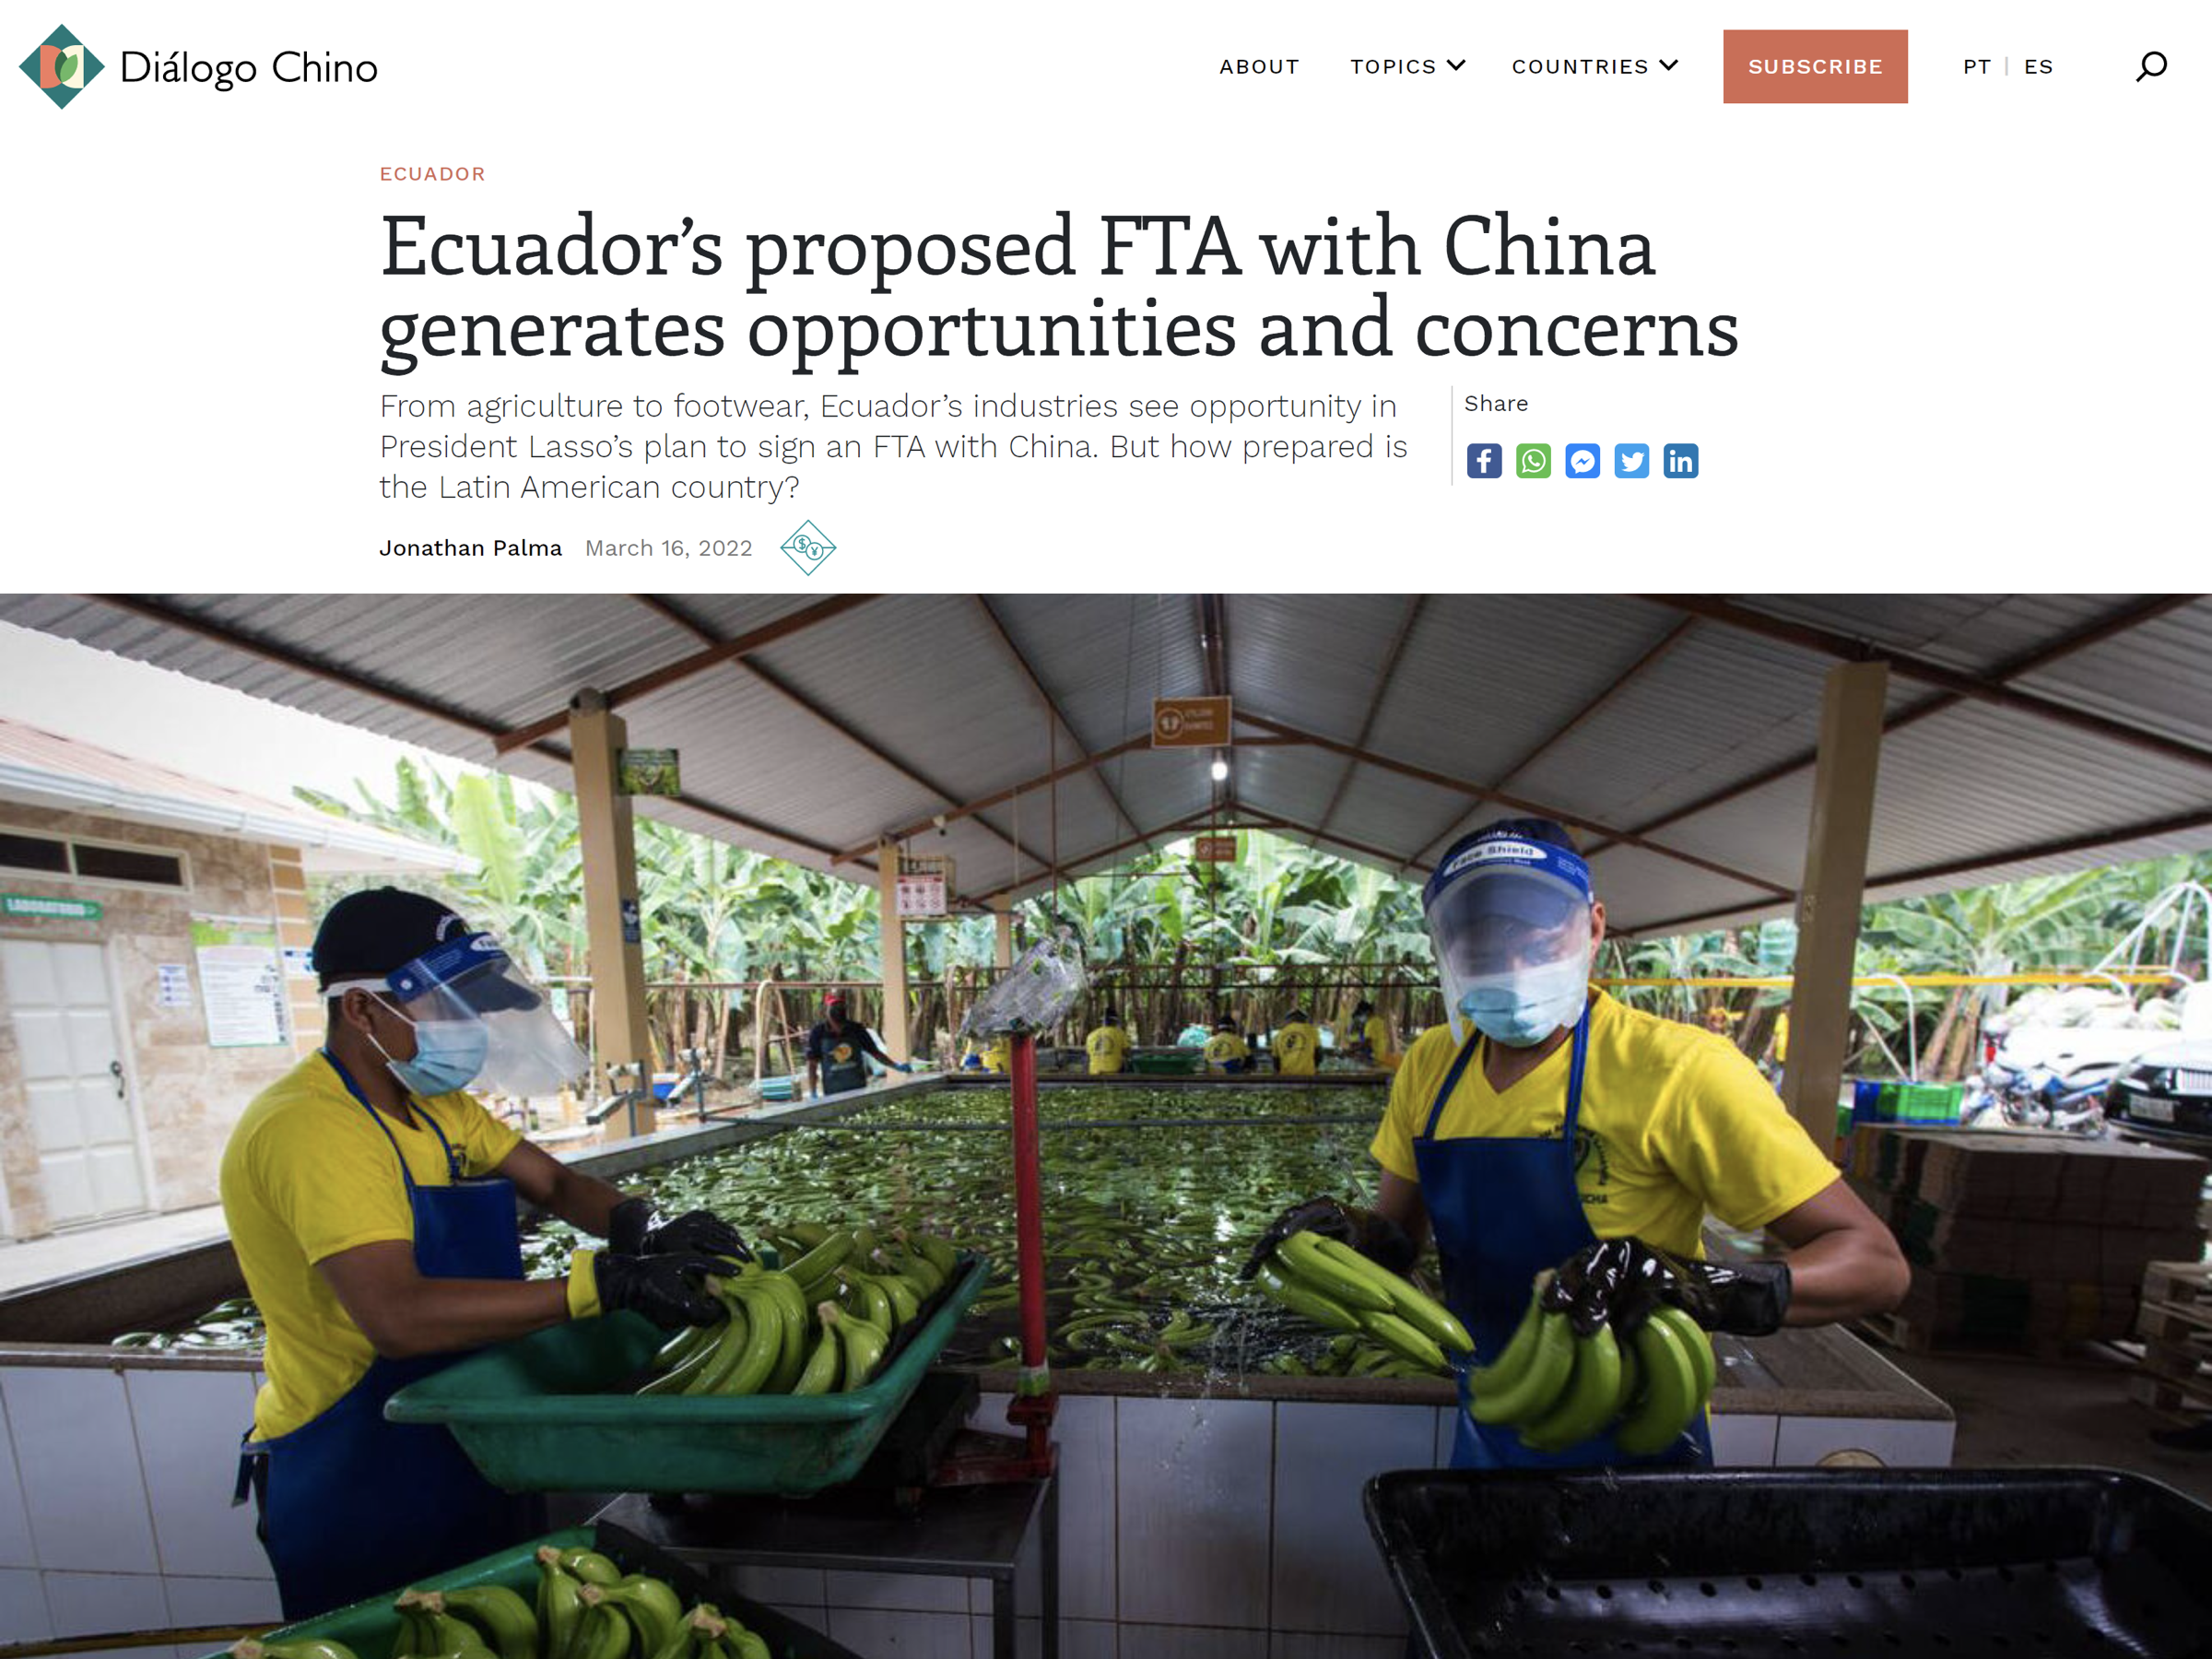 Ecuador’s proposed FTA with China generates opportunities and concerns